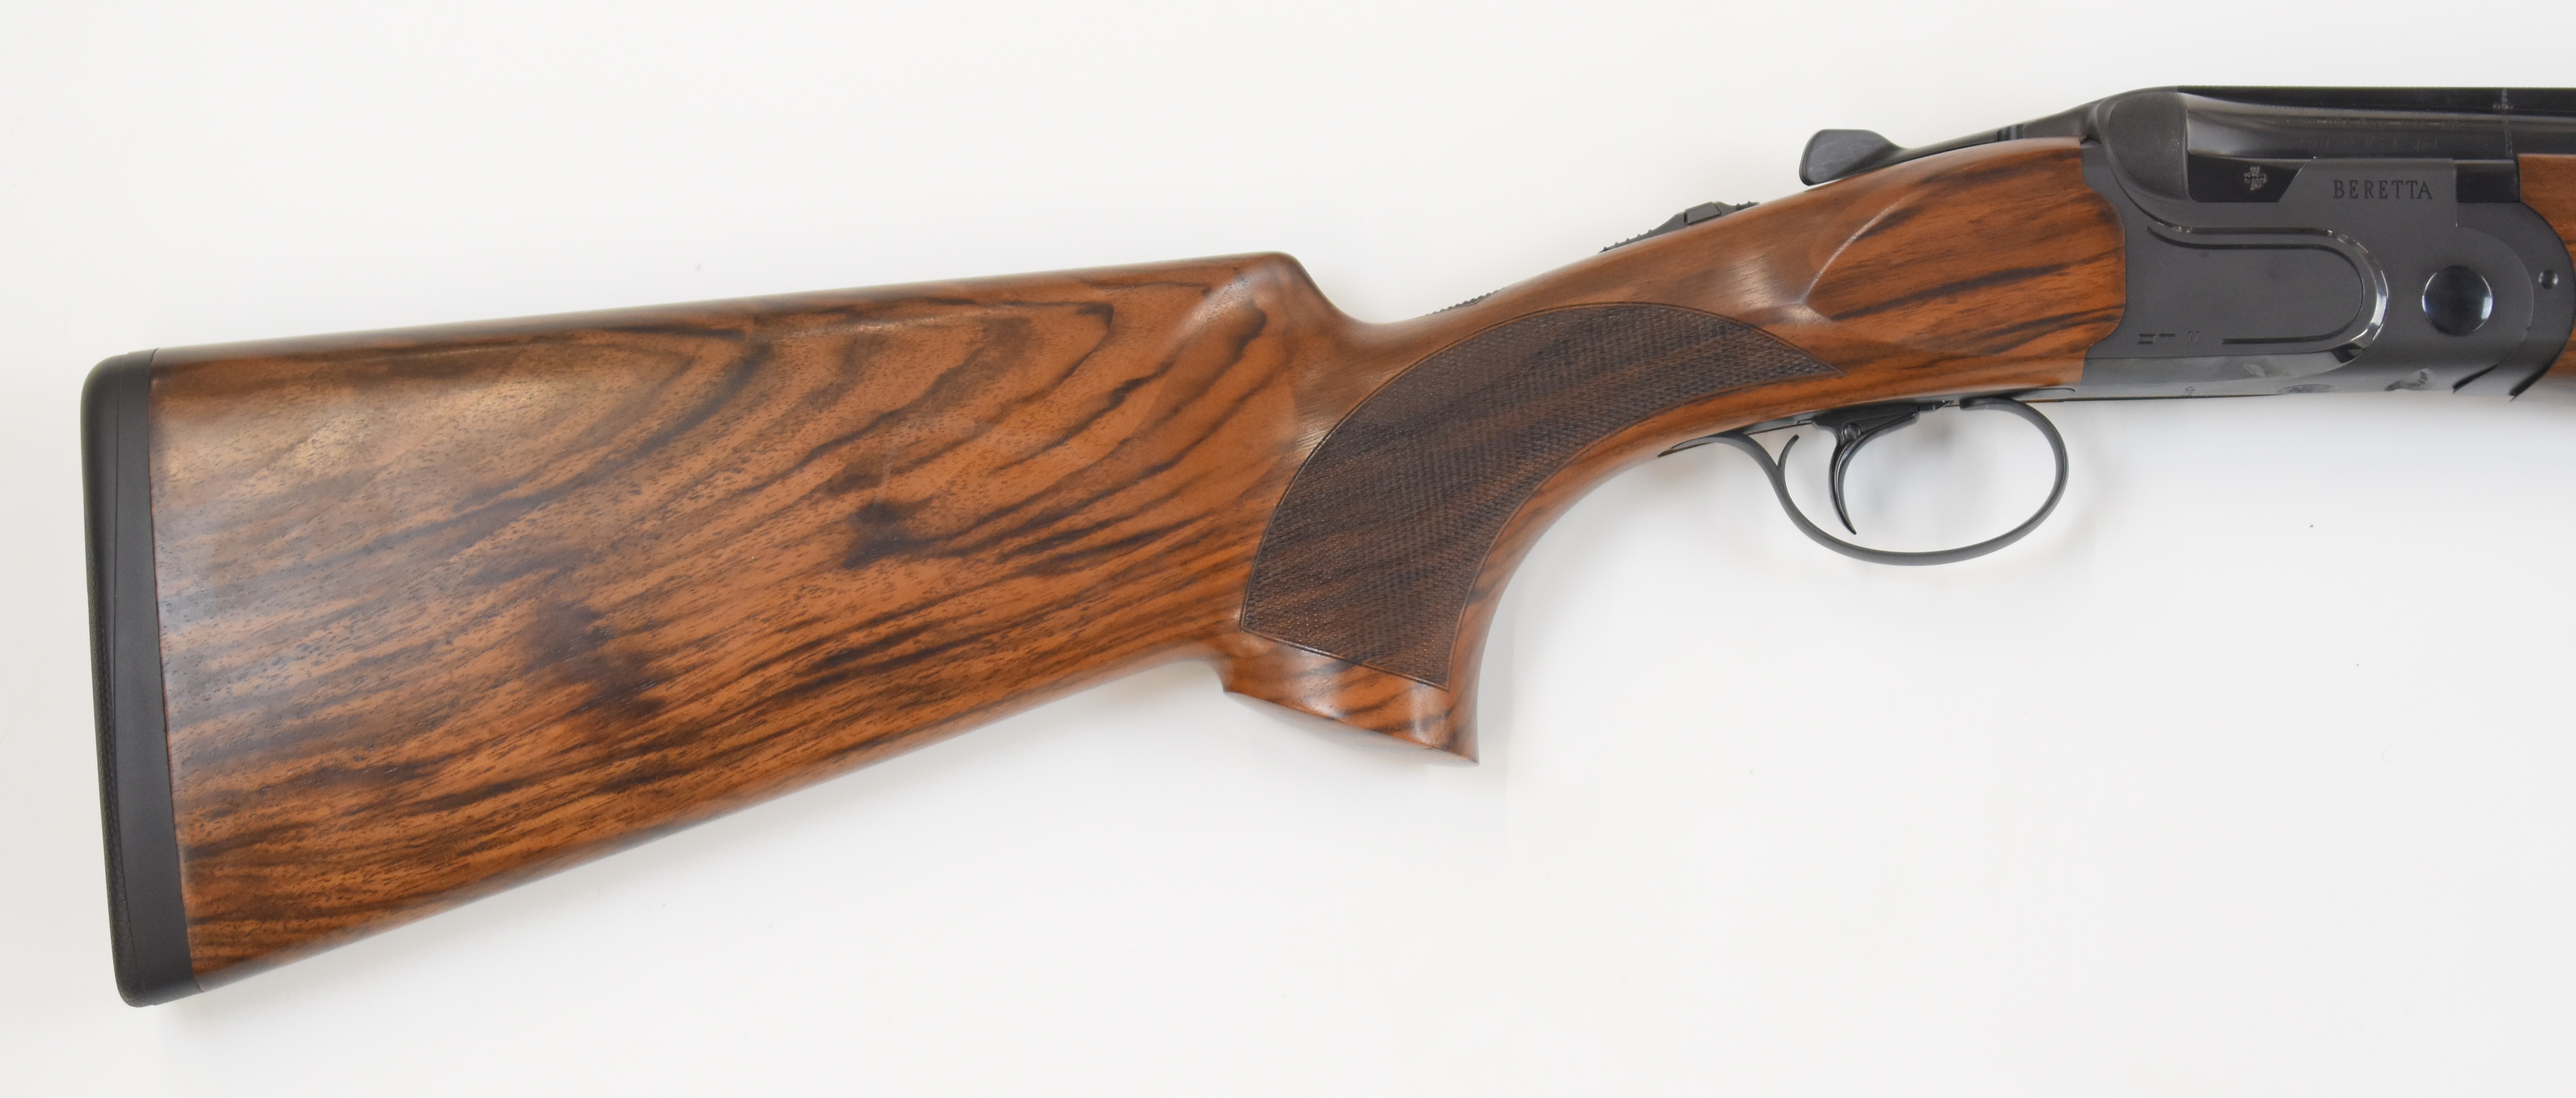 Beretta DT11 Sporting GMK 50th Anniversary Special Edition 12 bore over and under ejector shotgun - Image 3 of 13